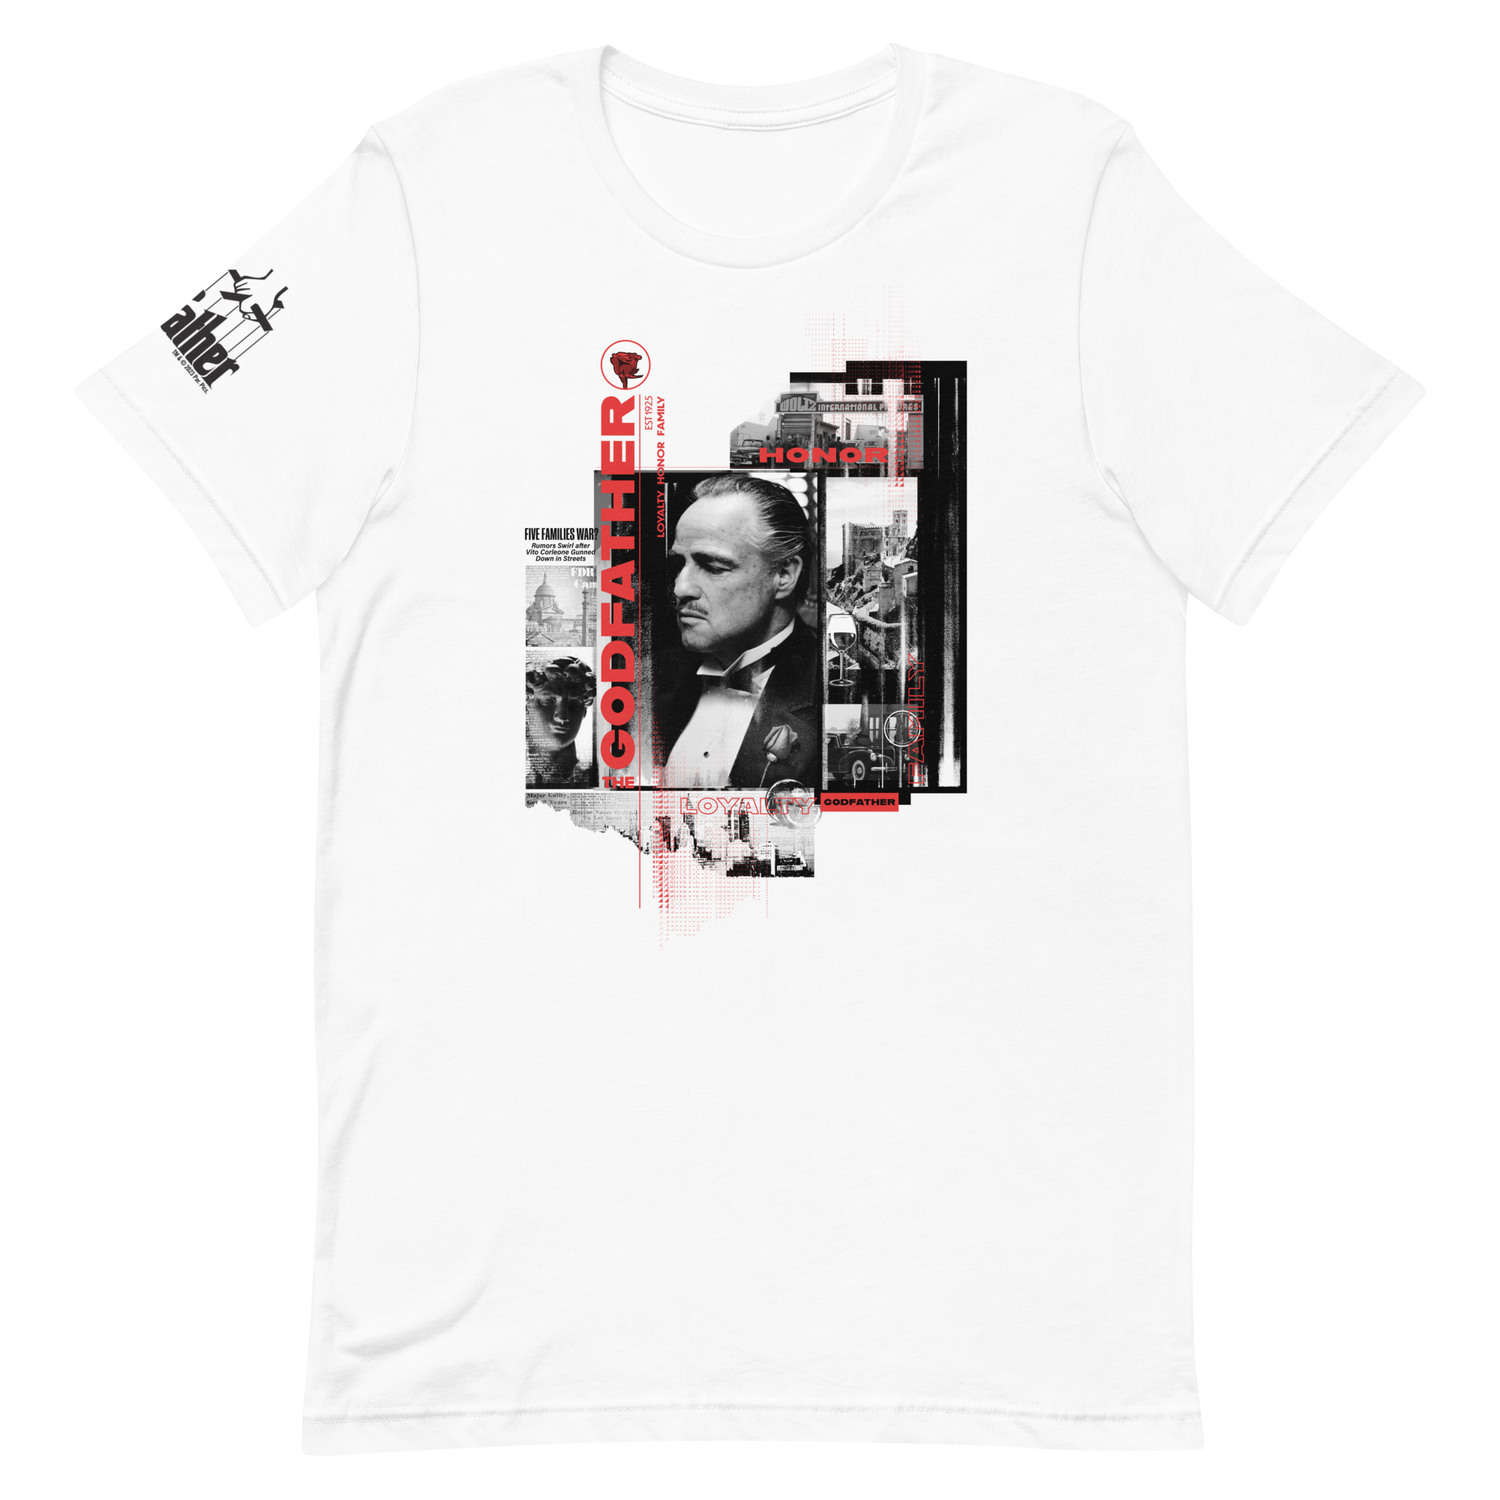 The Godfather "Honor Loyalty Family" Adult Short Sleeve T-Shirt